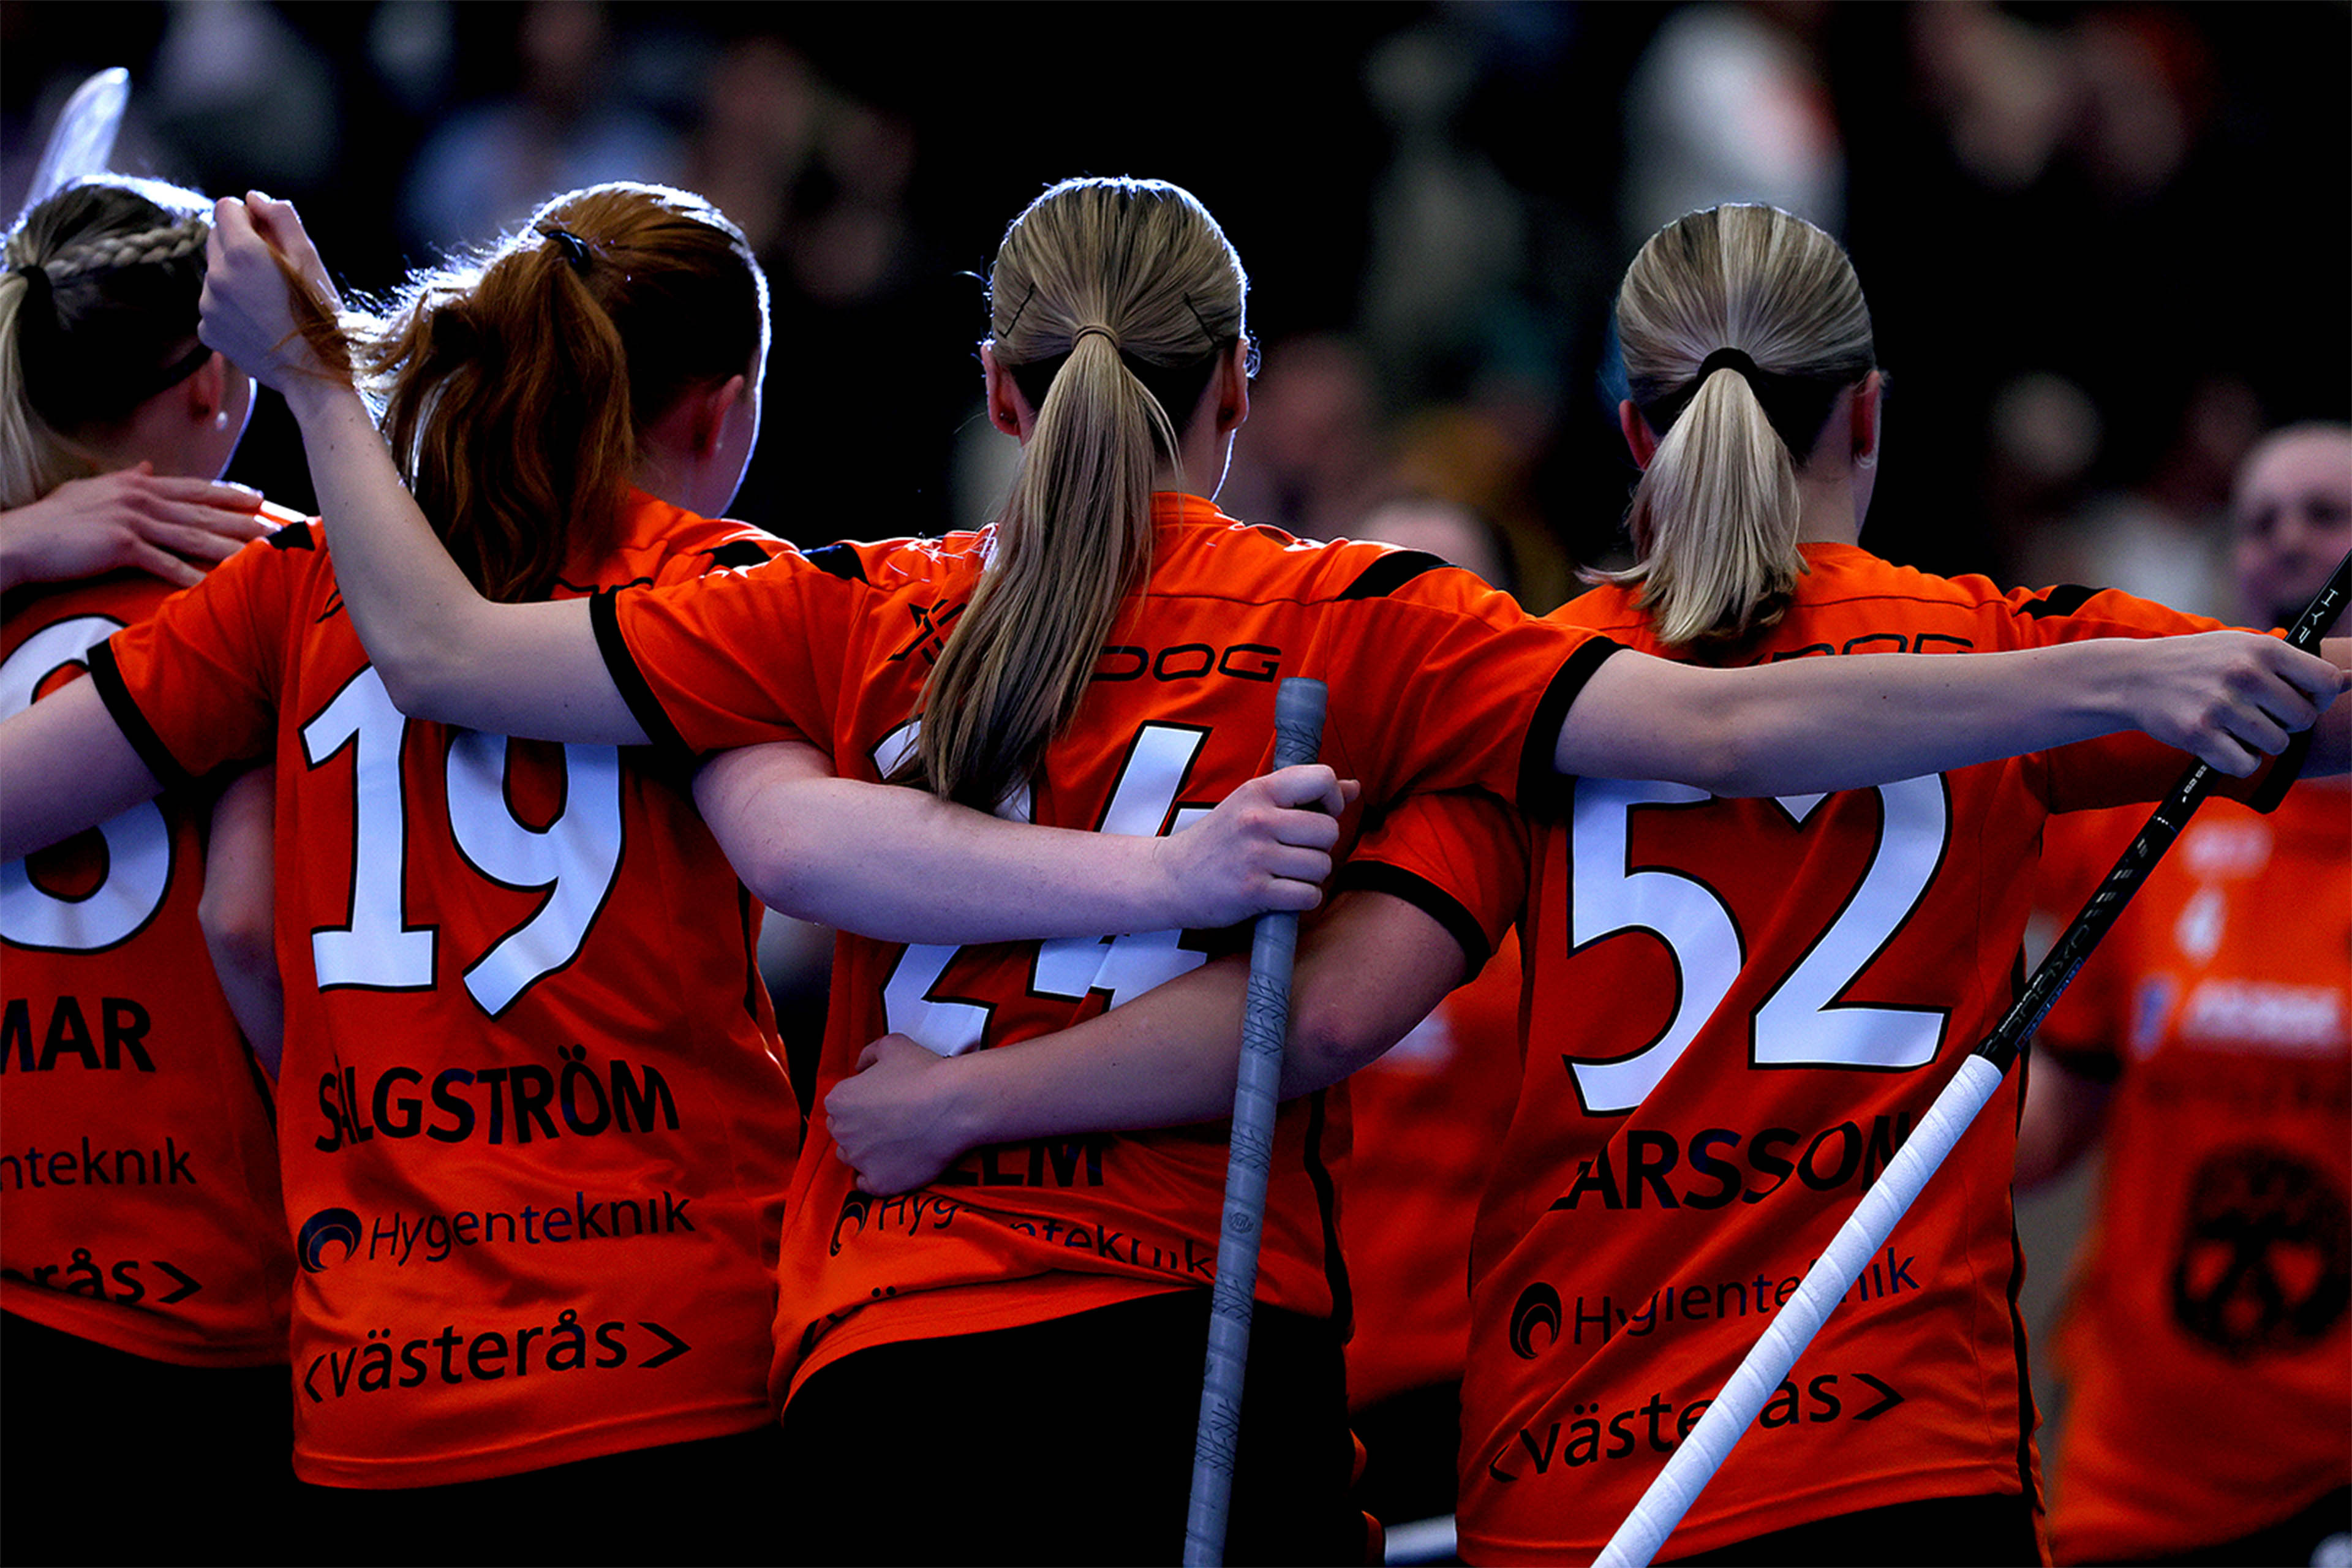 Sweden’s indoor bandy game creates a community value of just over 1.6 billion kronor